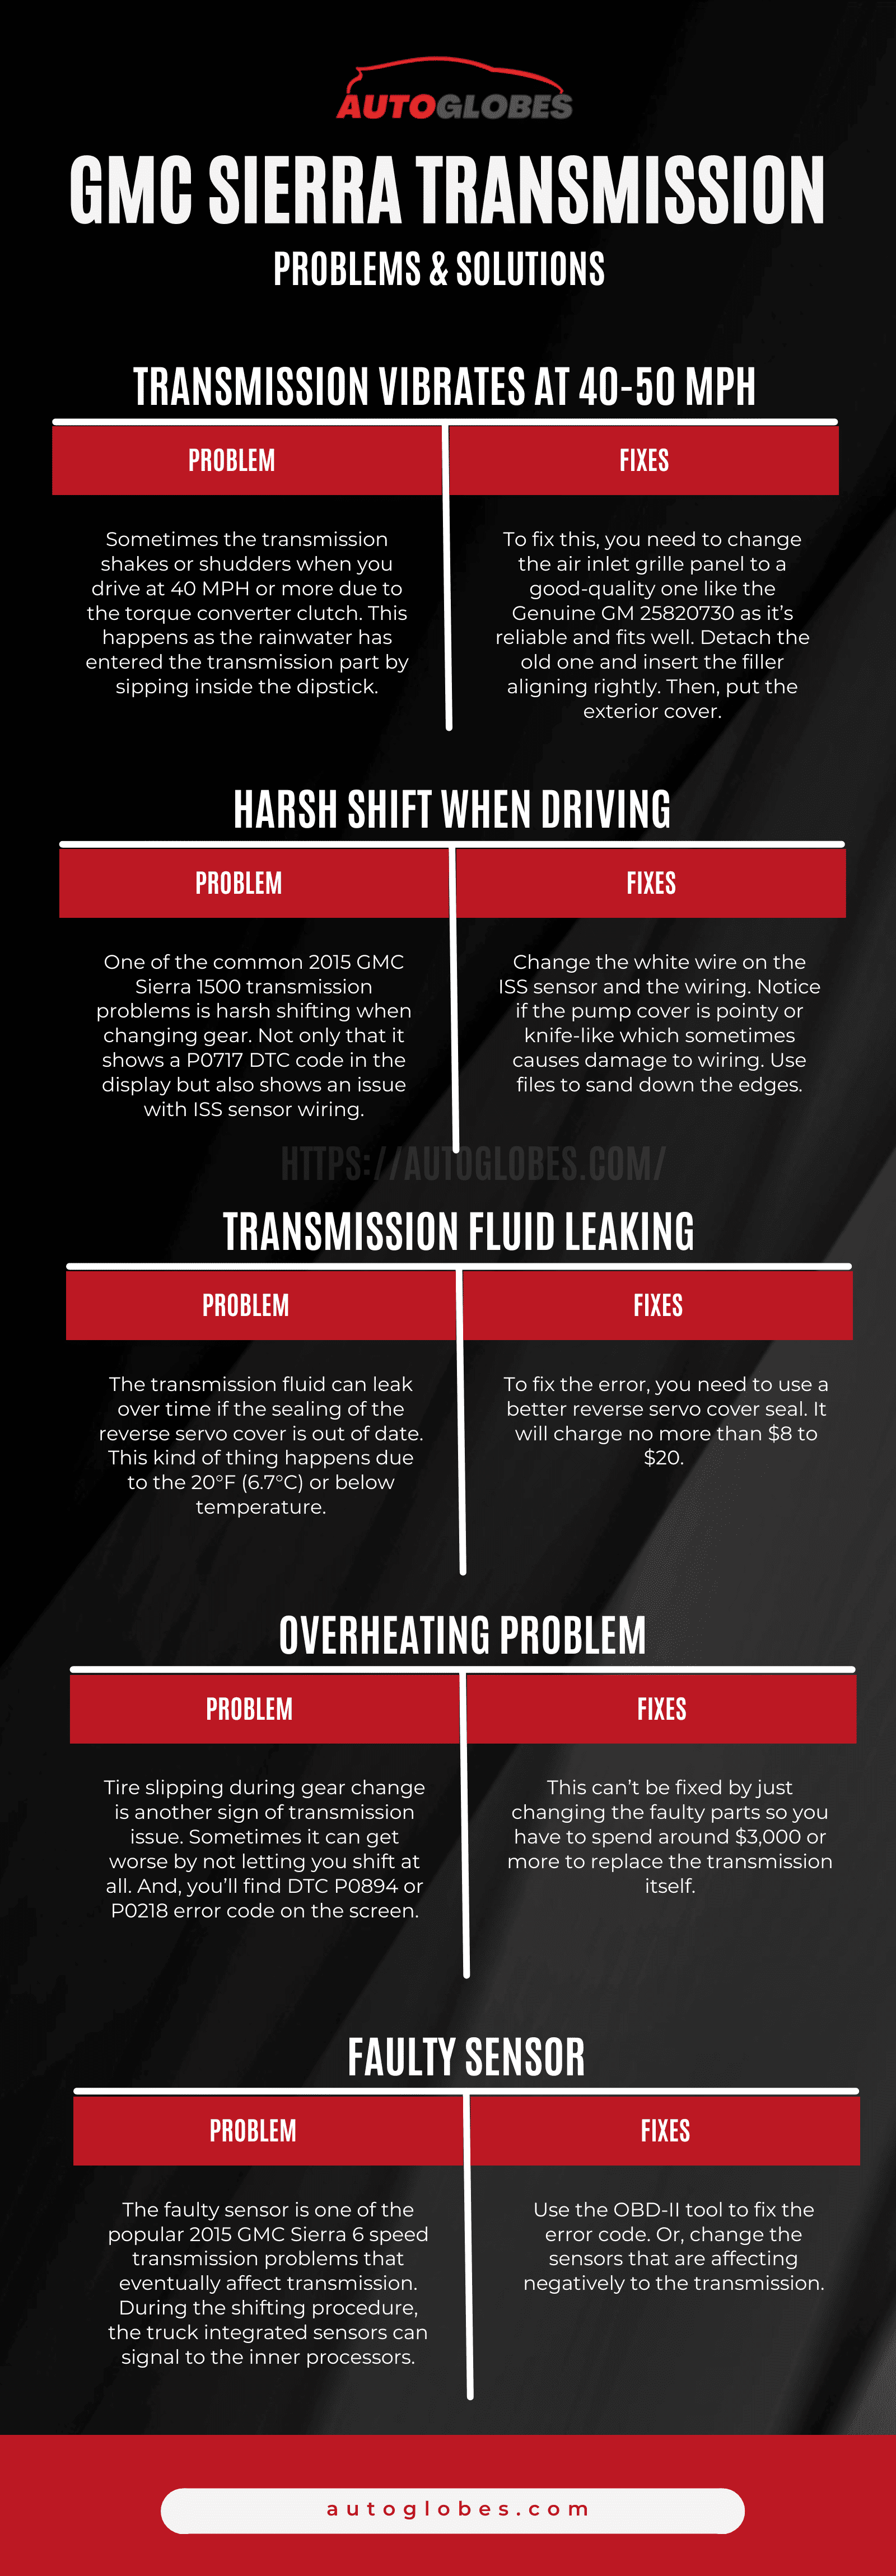 GMC Sierra Transmission Problems & Solutions infographic